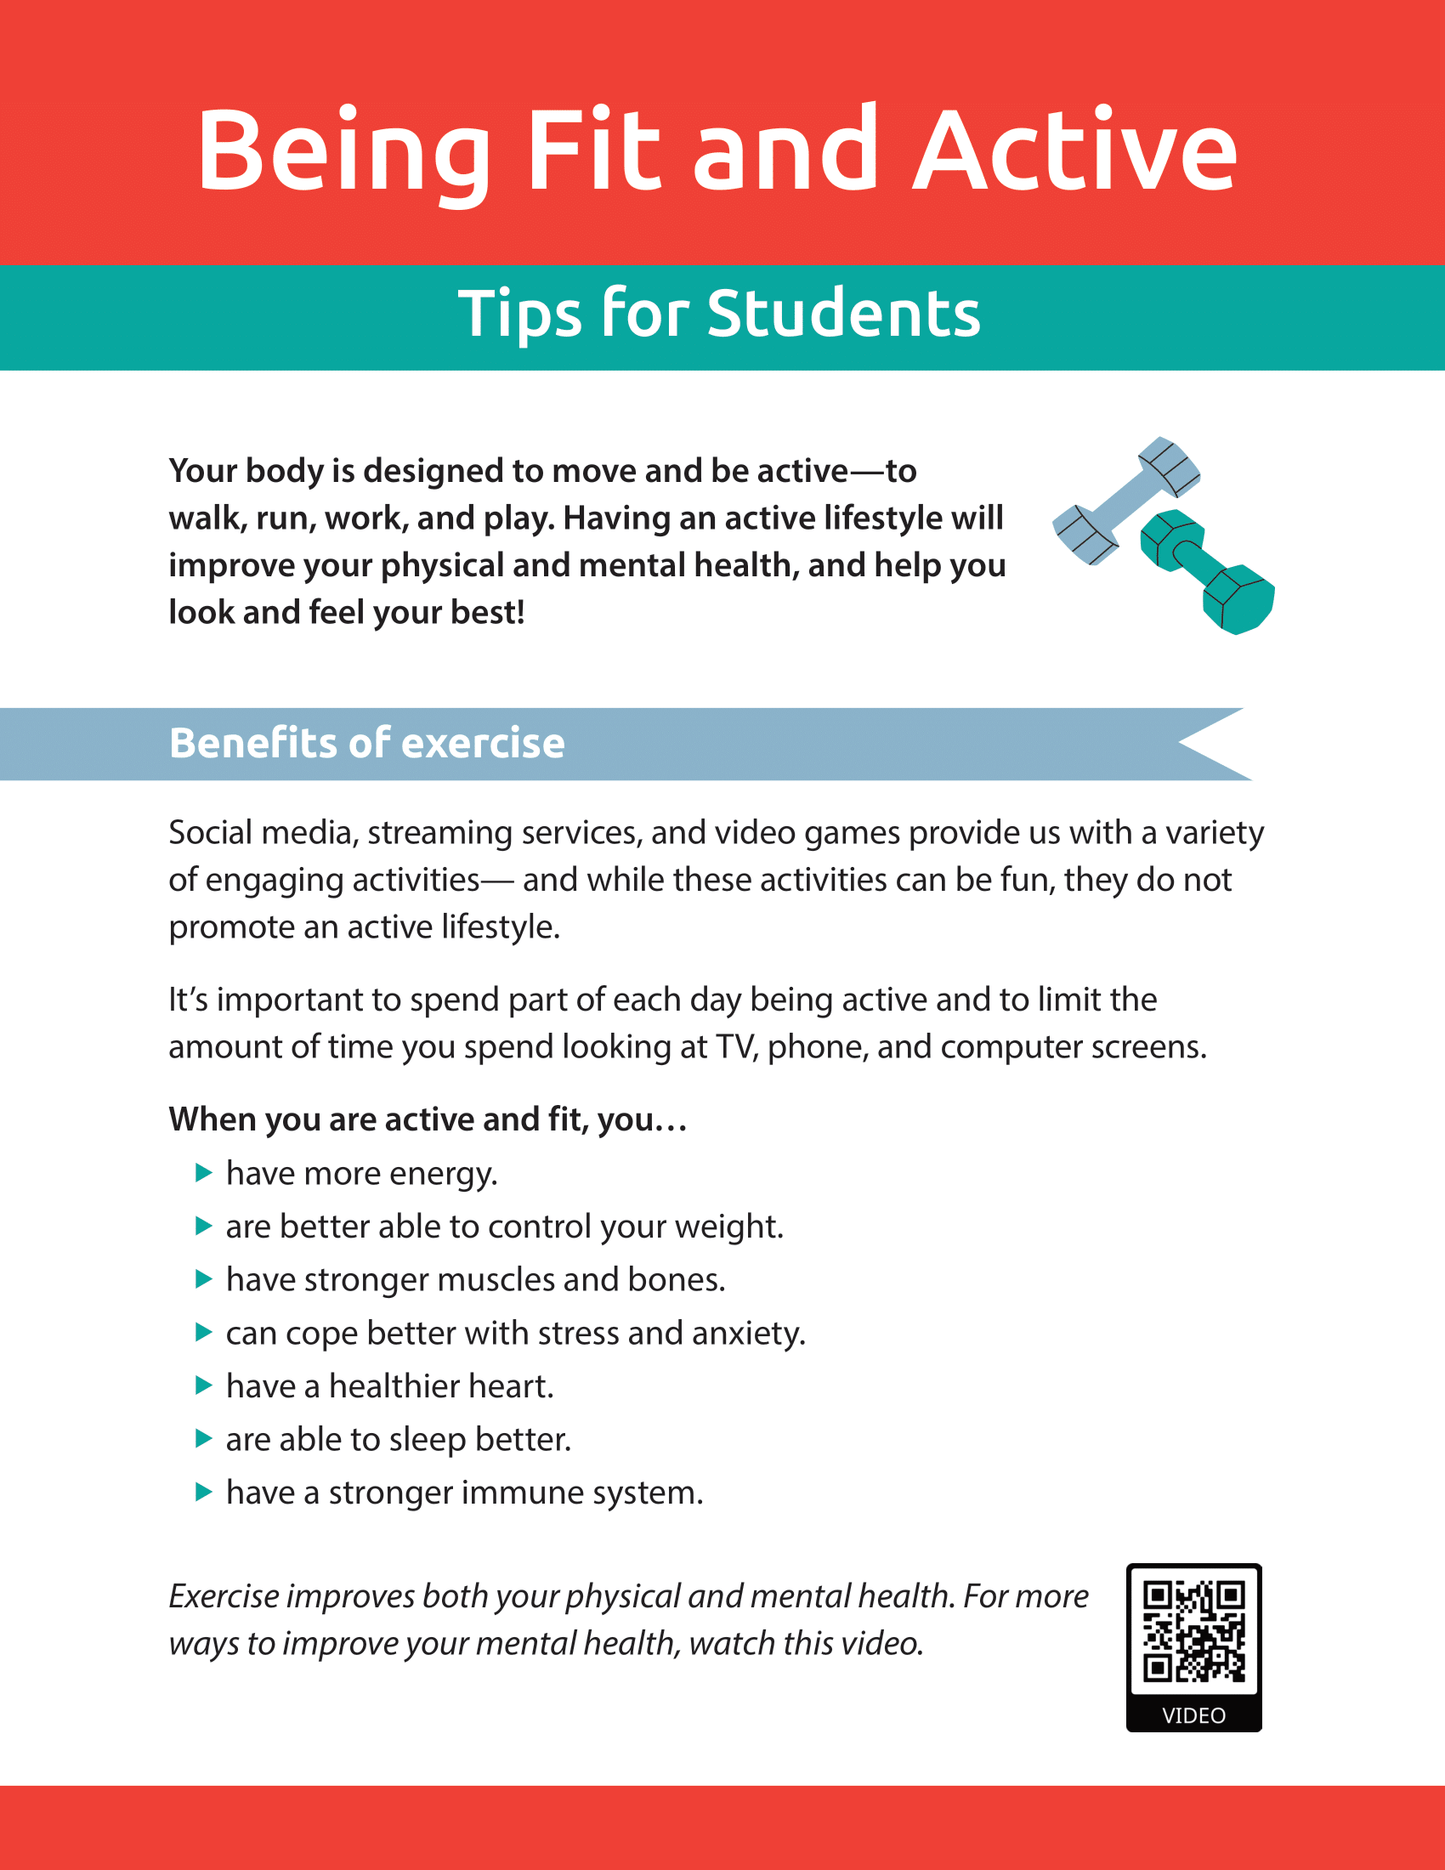 Being Fit and Active - Tips for Students